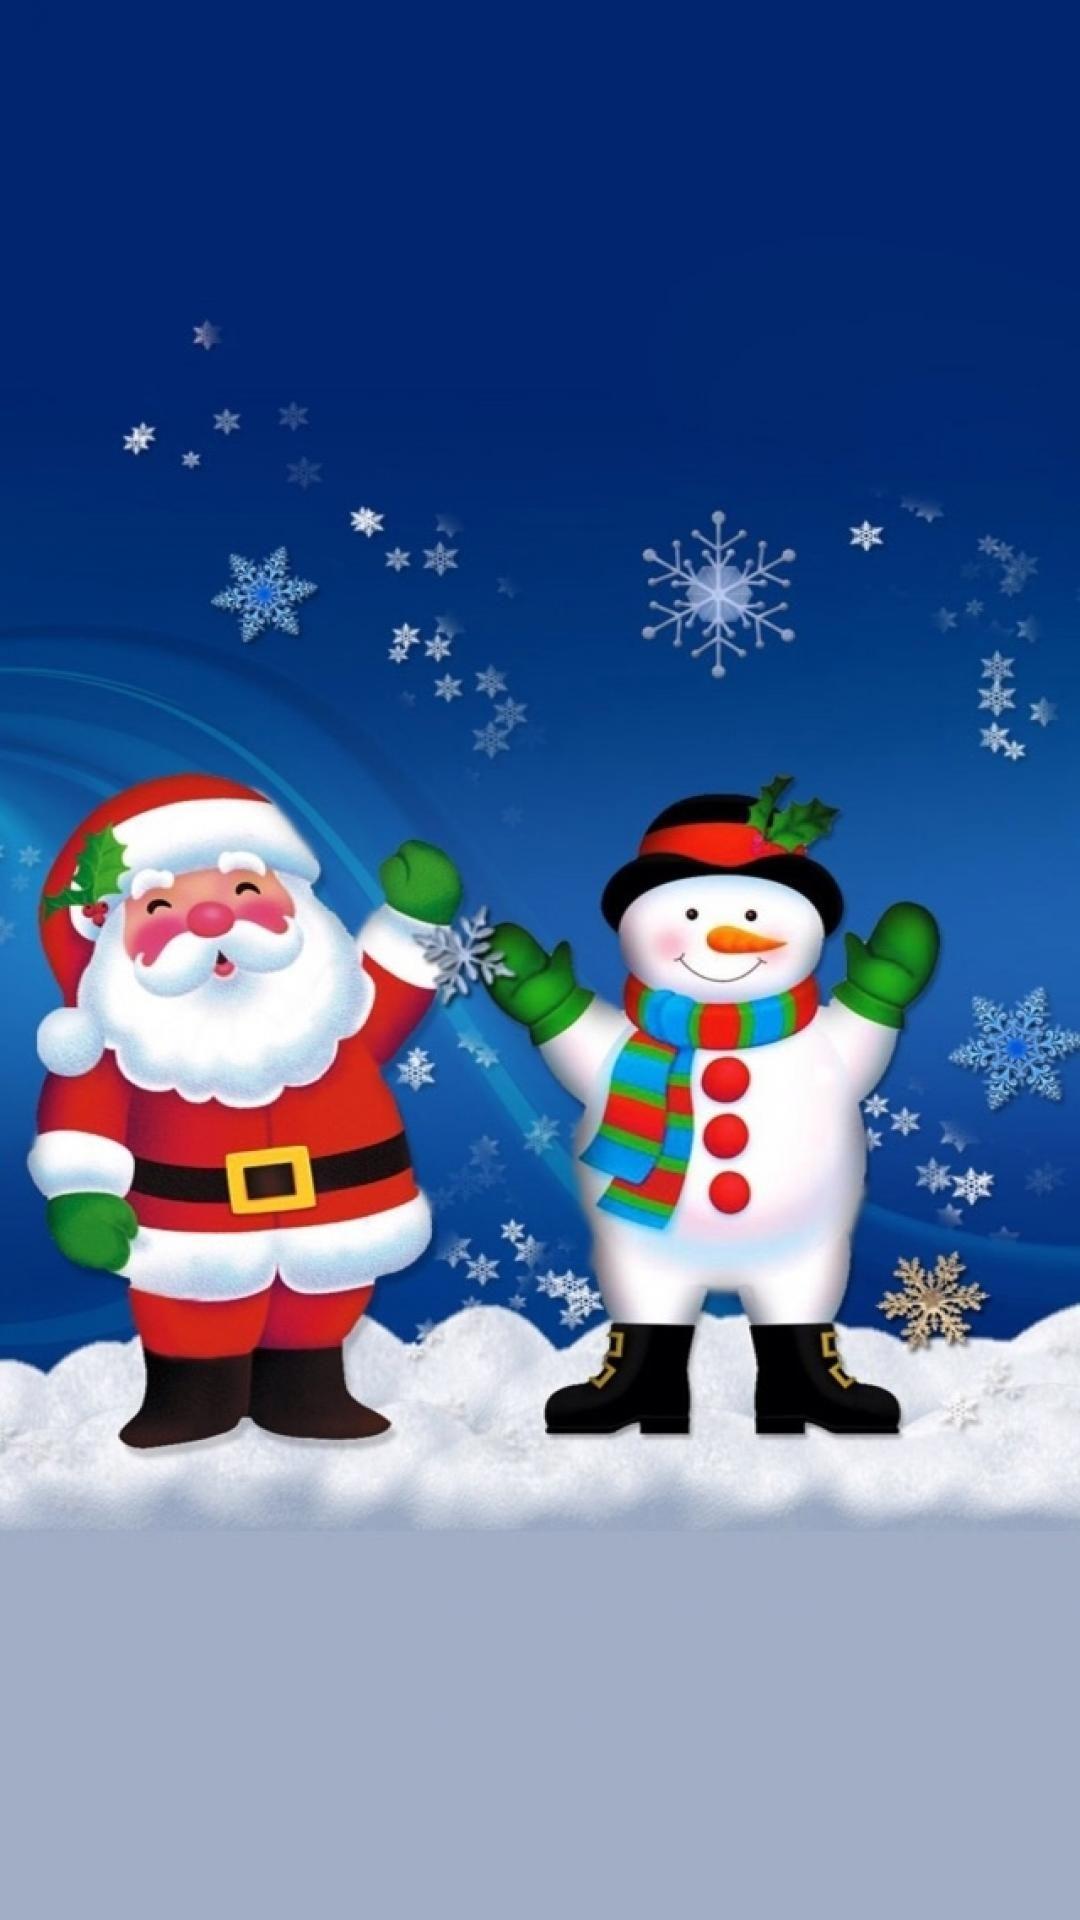 Merry Christmas Santa Claus And Snowman #wallpaper. Merry christmas wallpaper, Christmas screen savers, Christmas picture